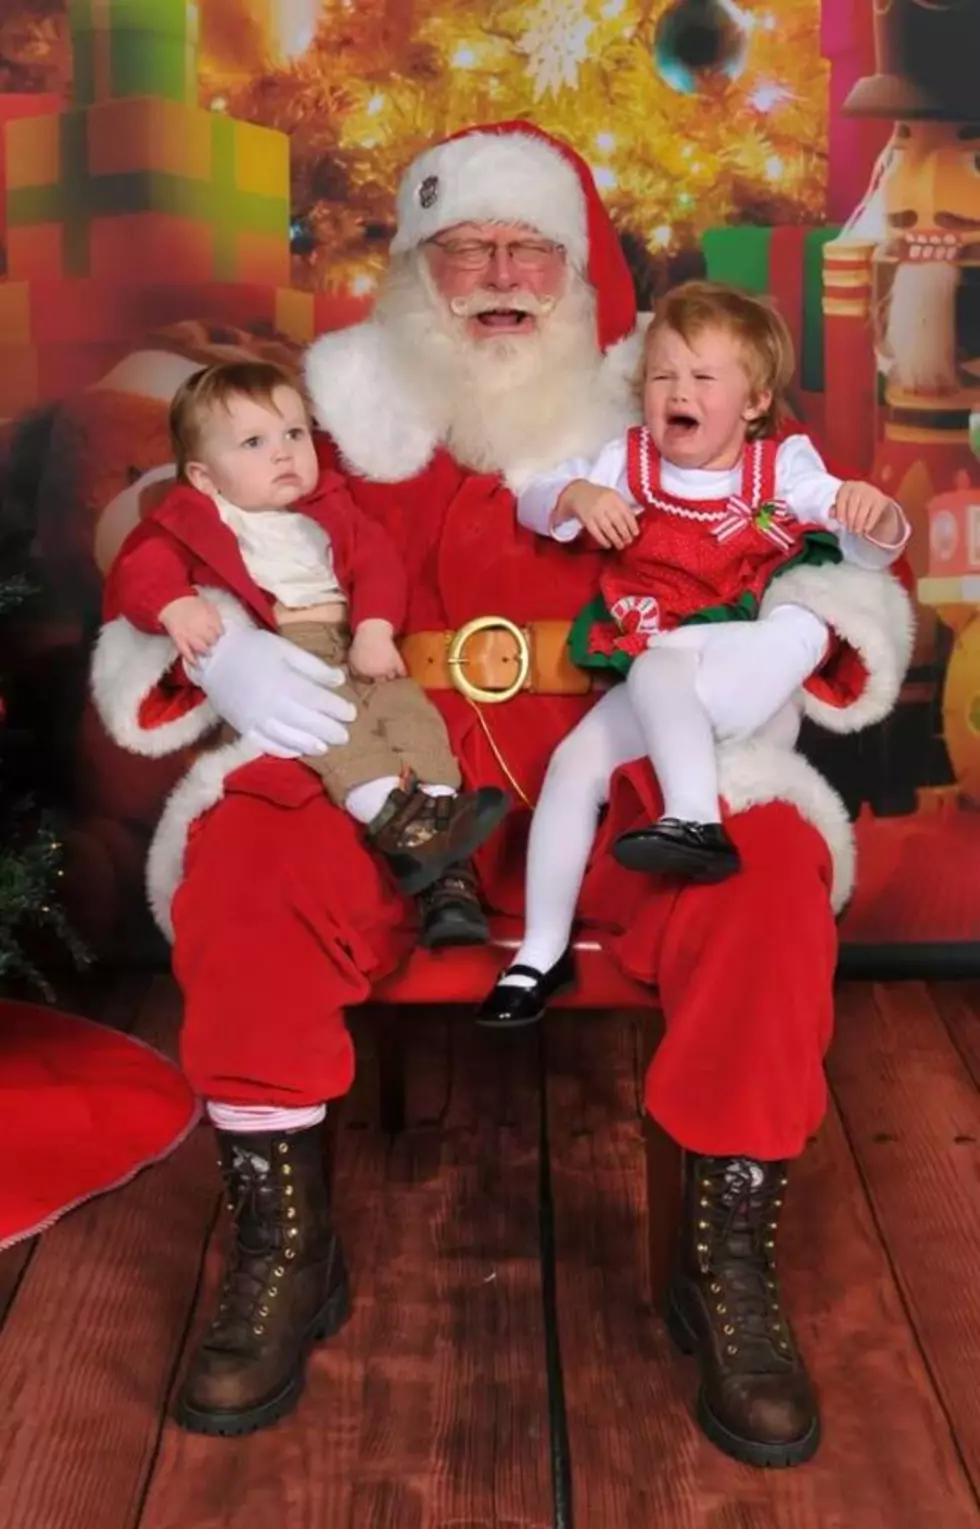 Prepare Your Kids Yakima – They Won’t Be On Santa’s Lap This Year